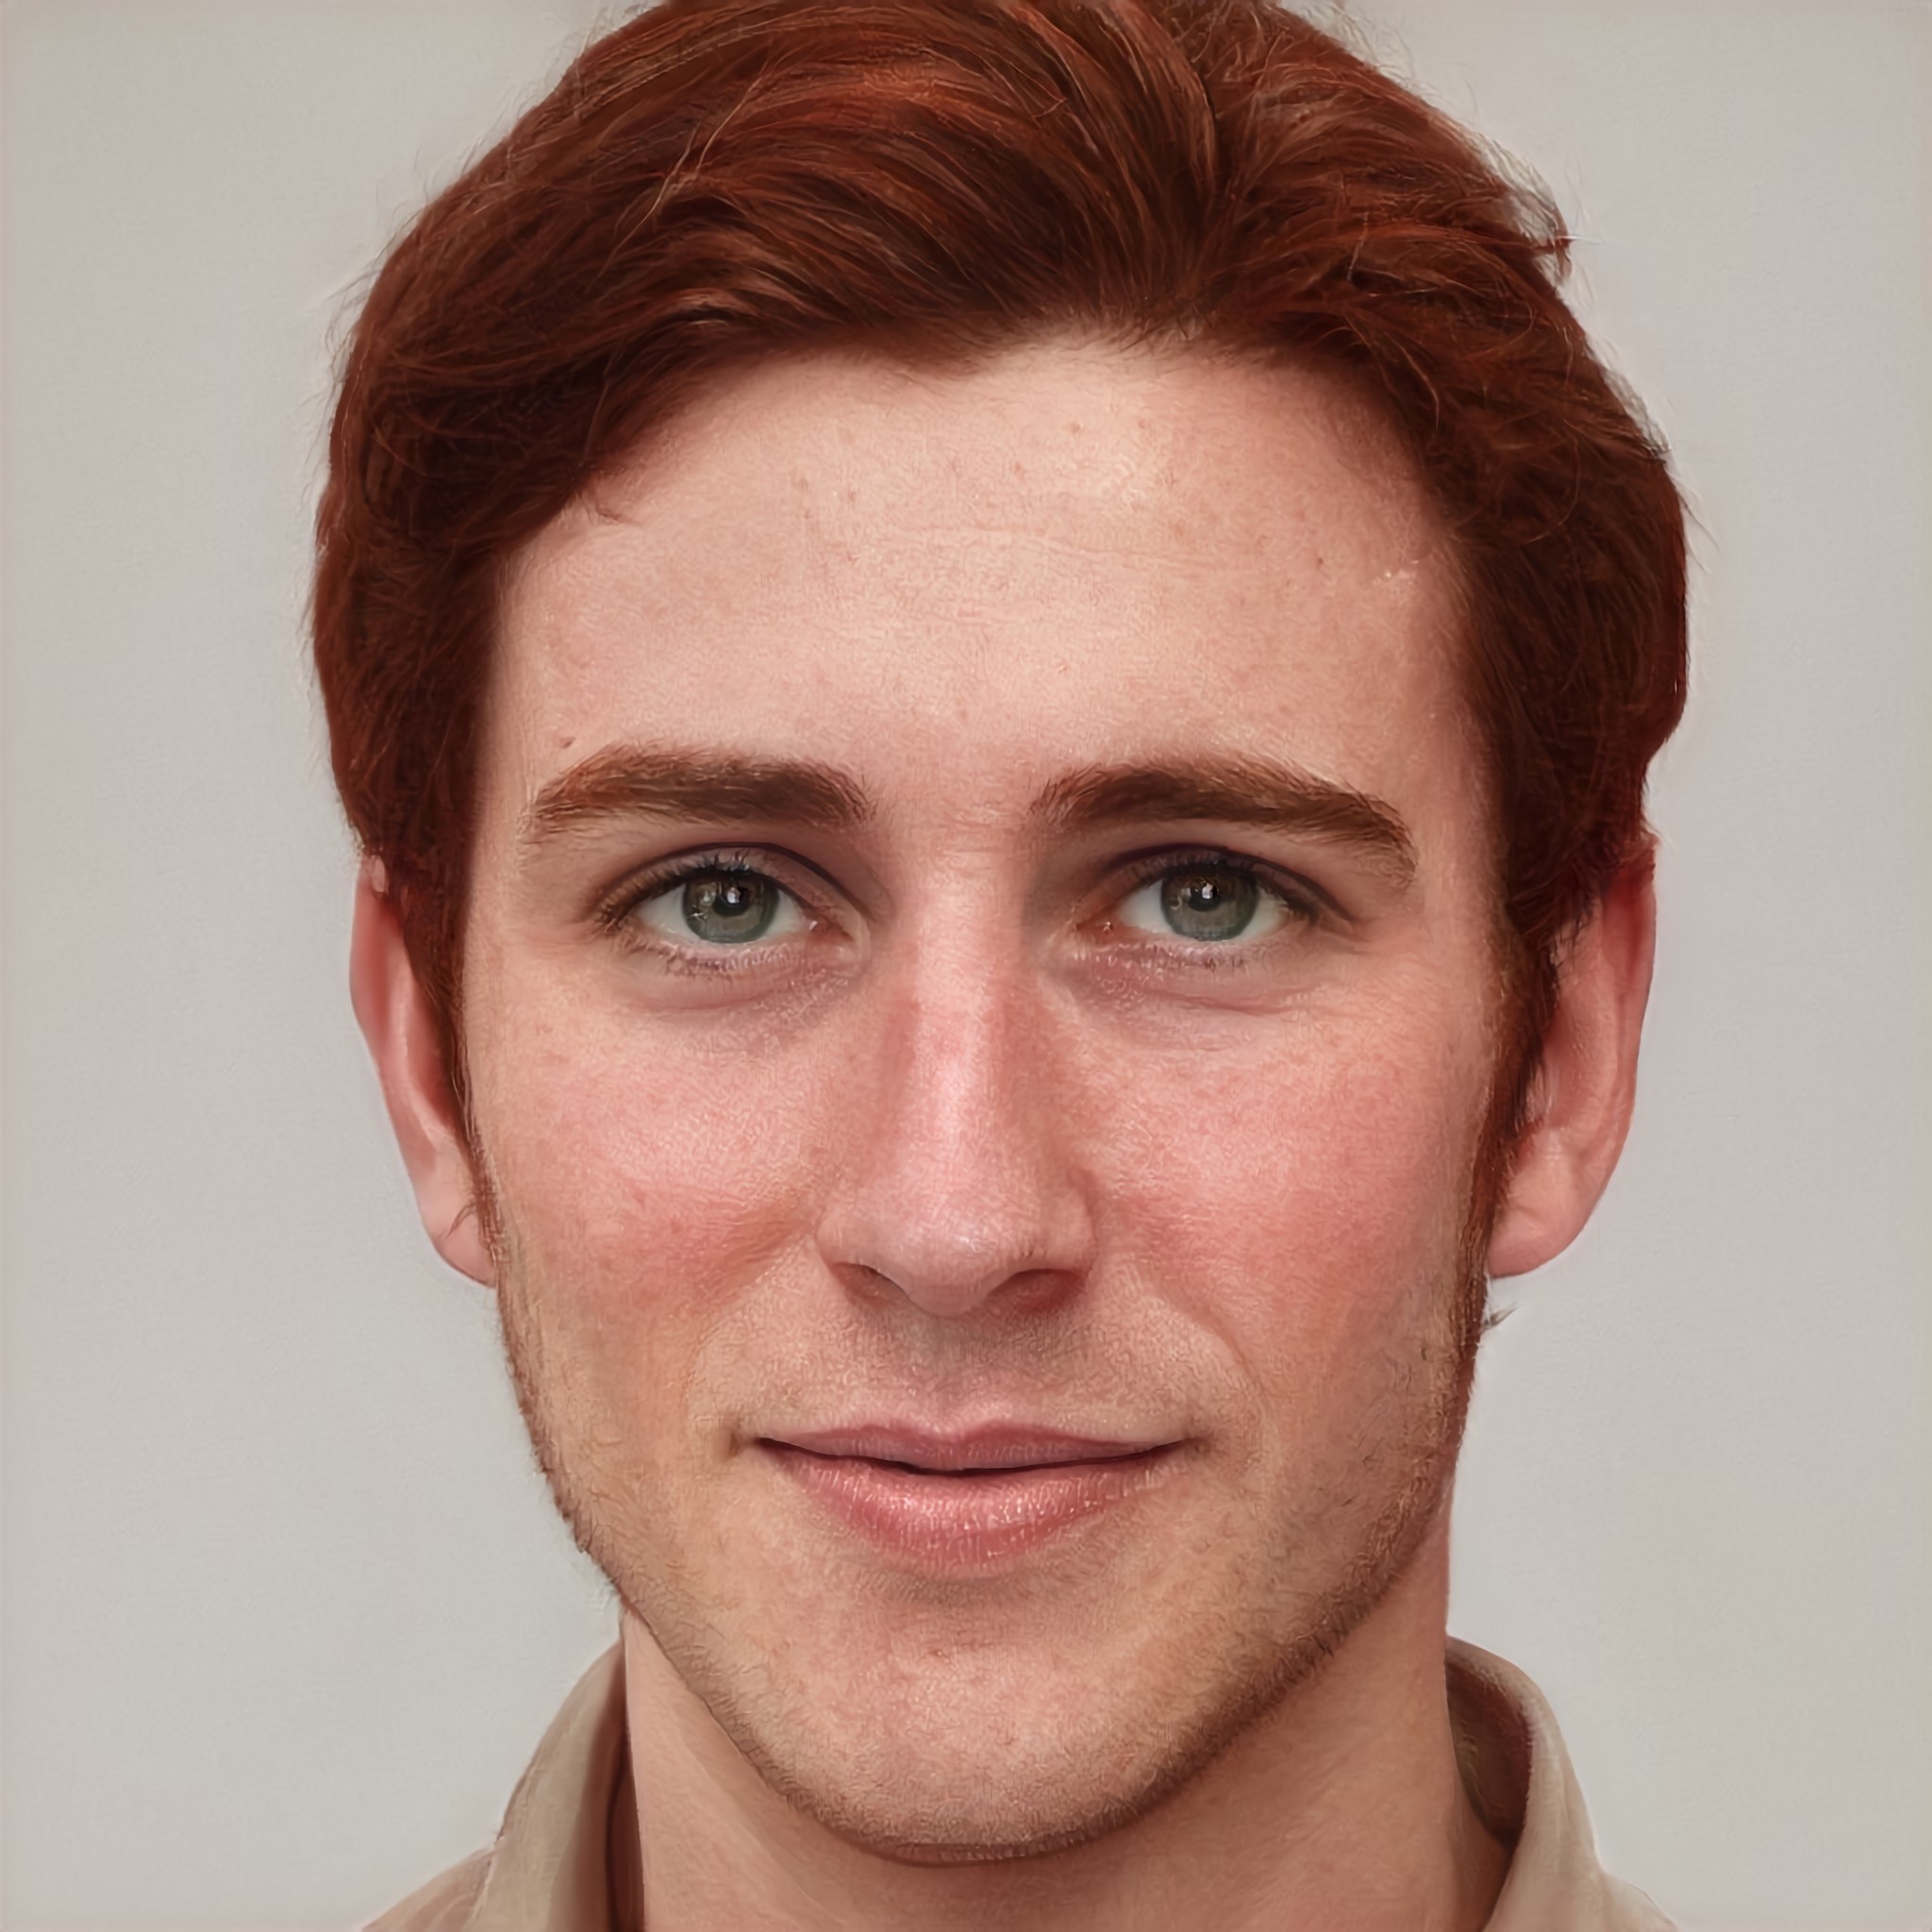 prince with freckles, light eyes, and red hair